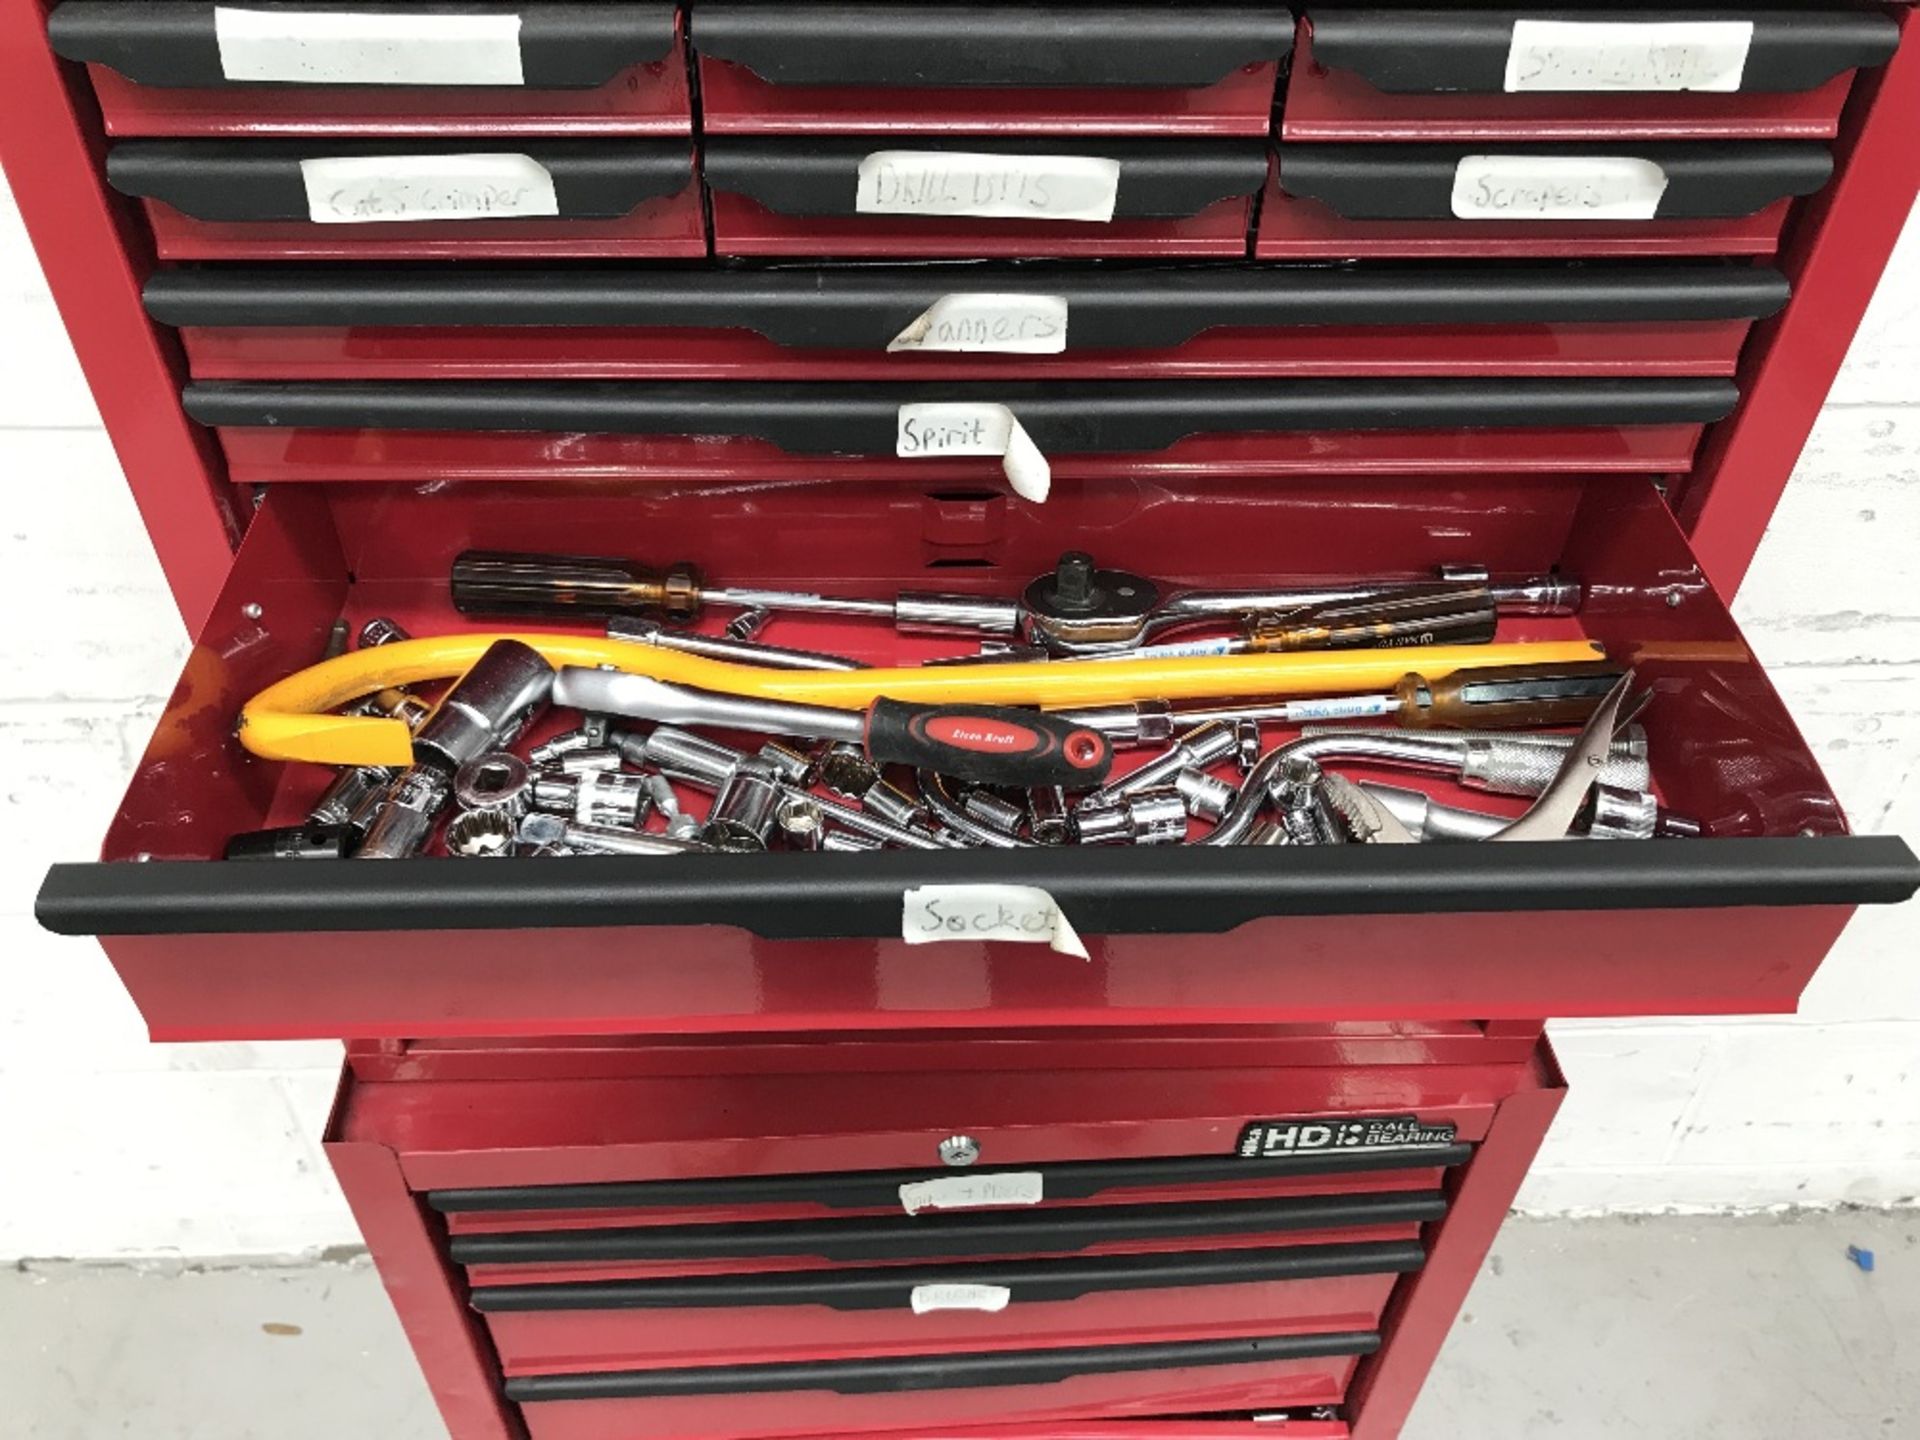 Hilka HD Ball Bearing Tool Chest and Contents - Image 6 of 13